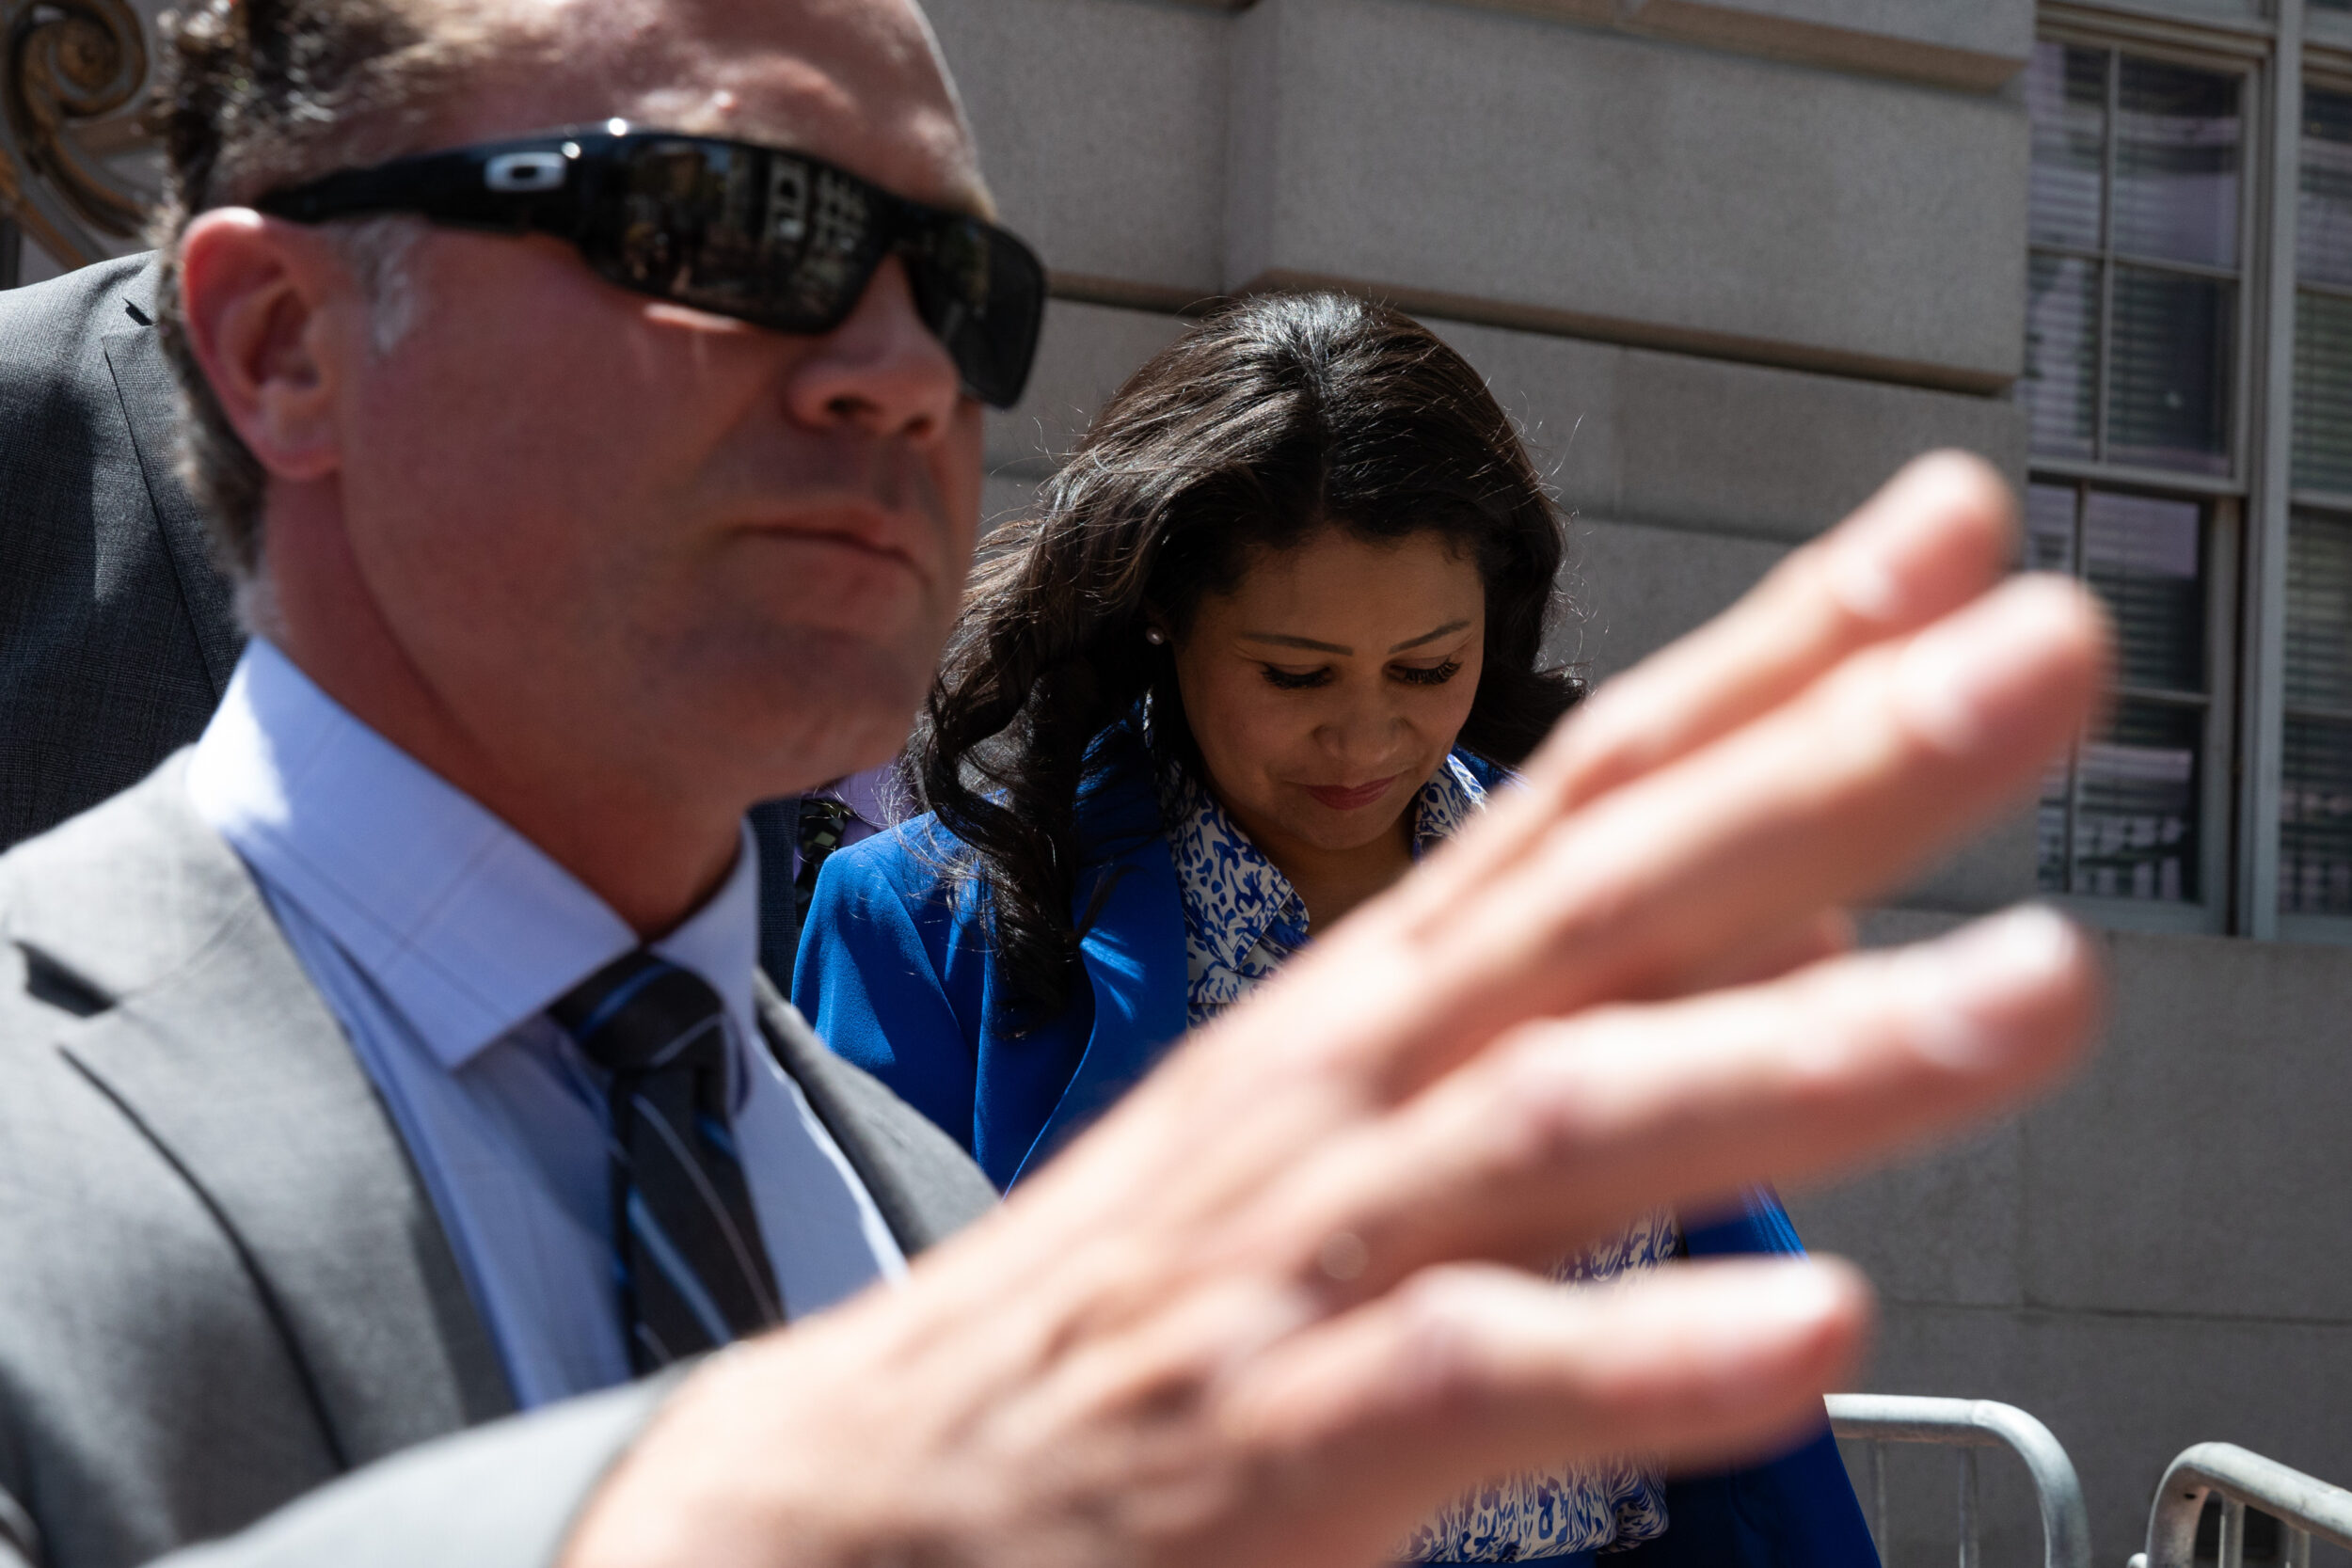 A man in sunglasses extends his hand to the camera; a woman in blue looks down behind him. They're outside, in daylight.